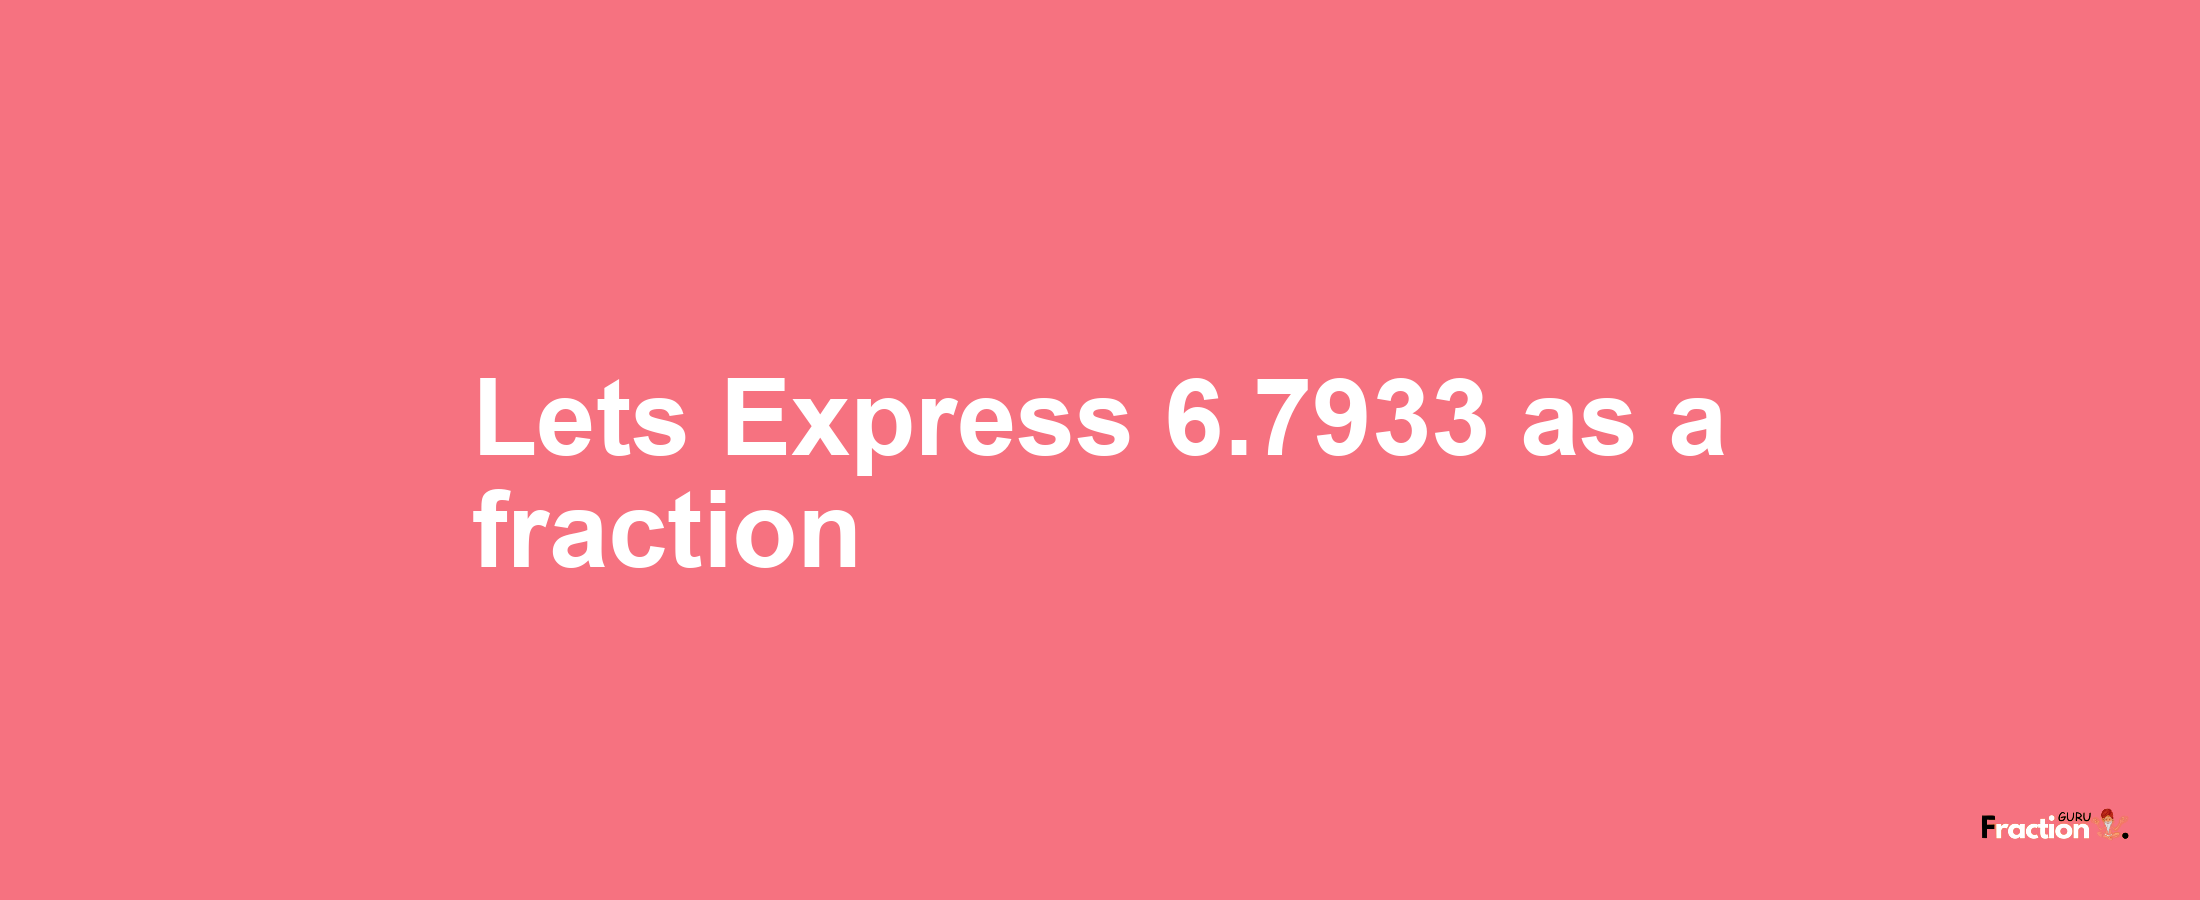 Lets Express 6.7933 as afraction